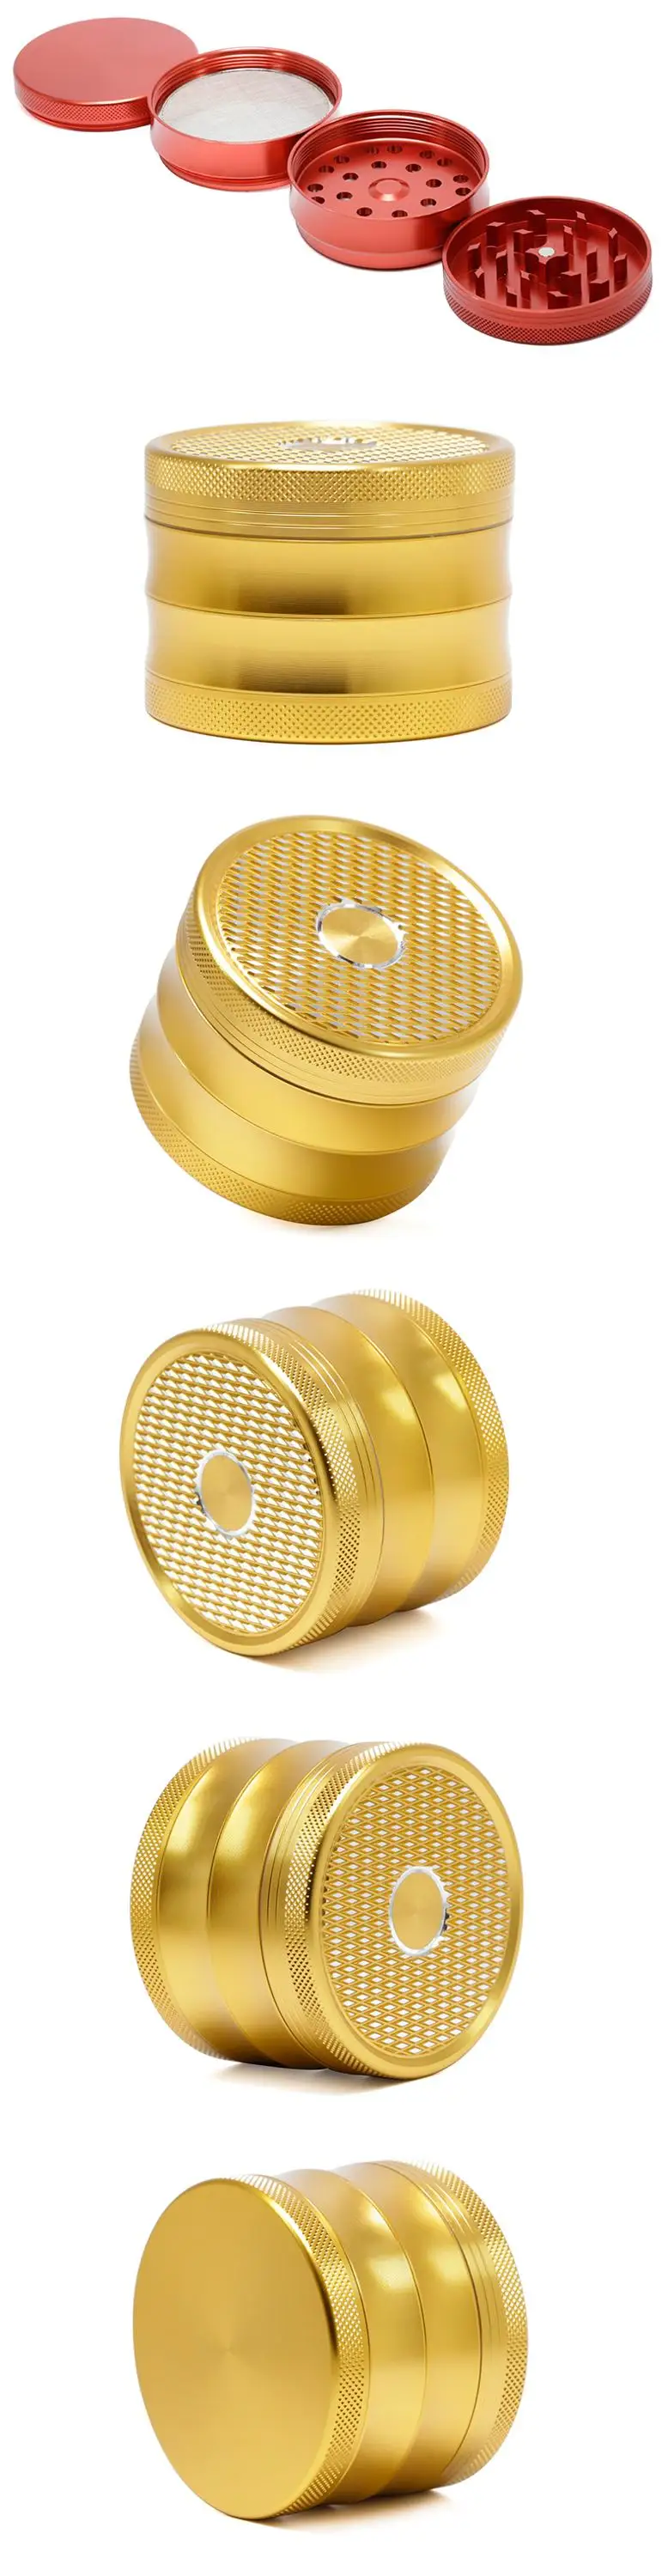 Wholesale price new diamond 4piece gold green black herb grinders for weed